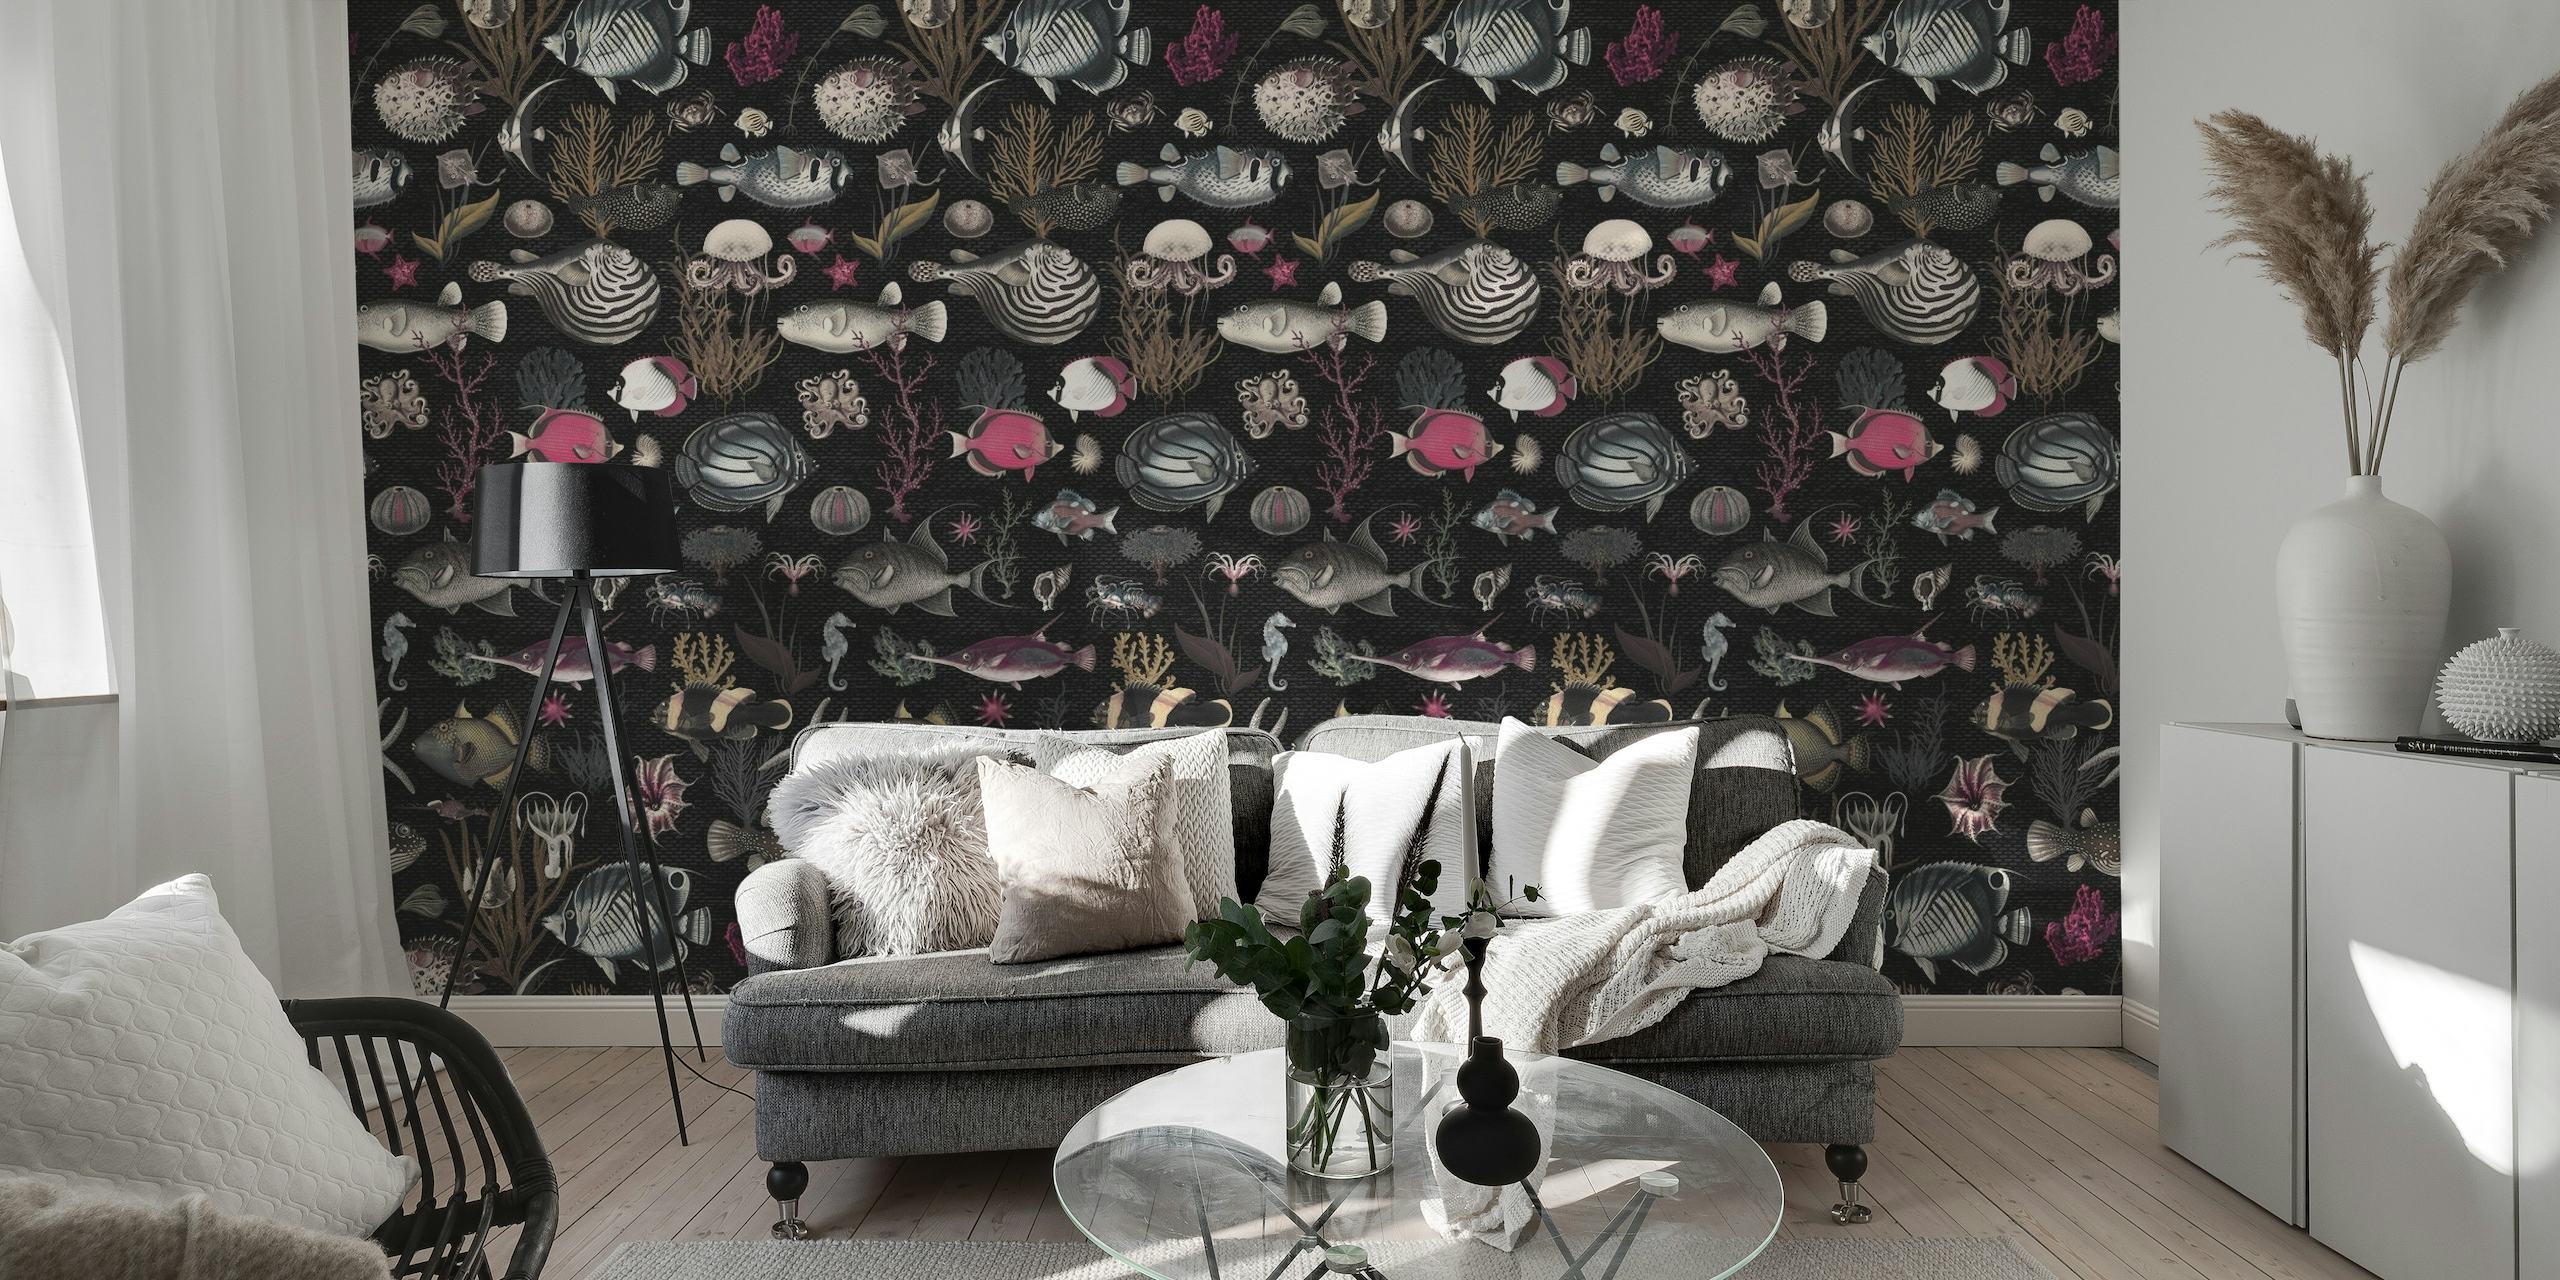 Oceania themed wall mural in black, fuchsia, and olive tones with marine elements